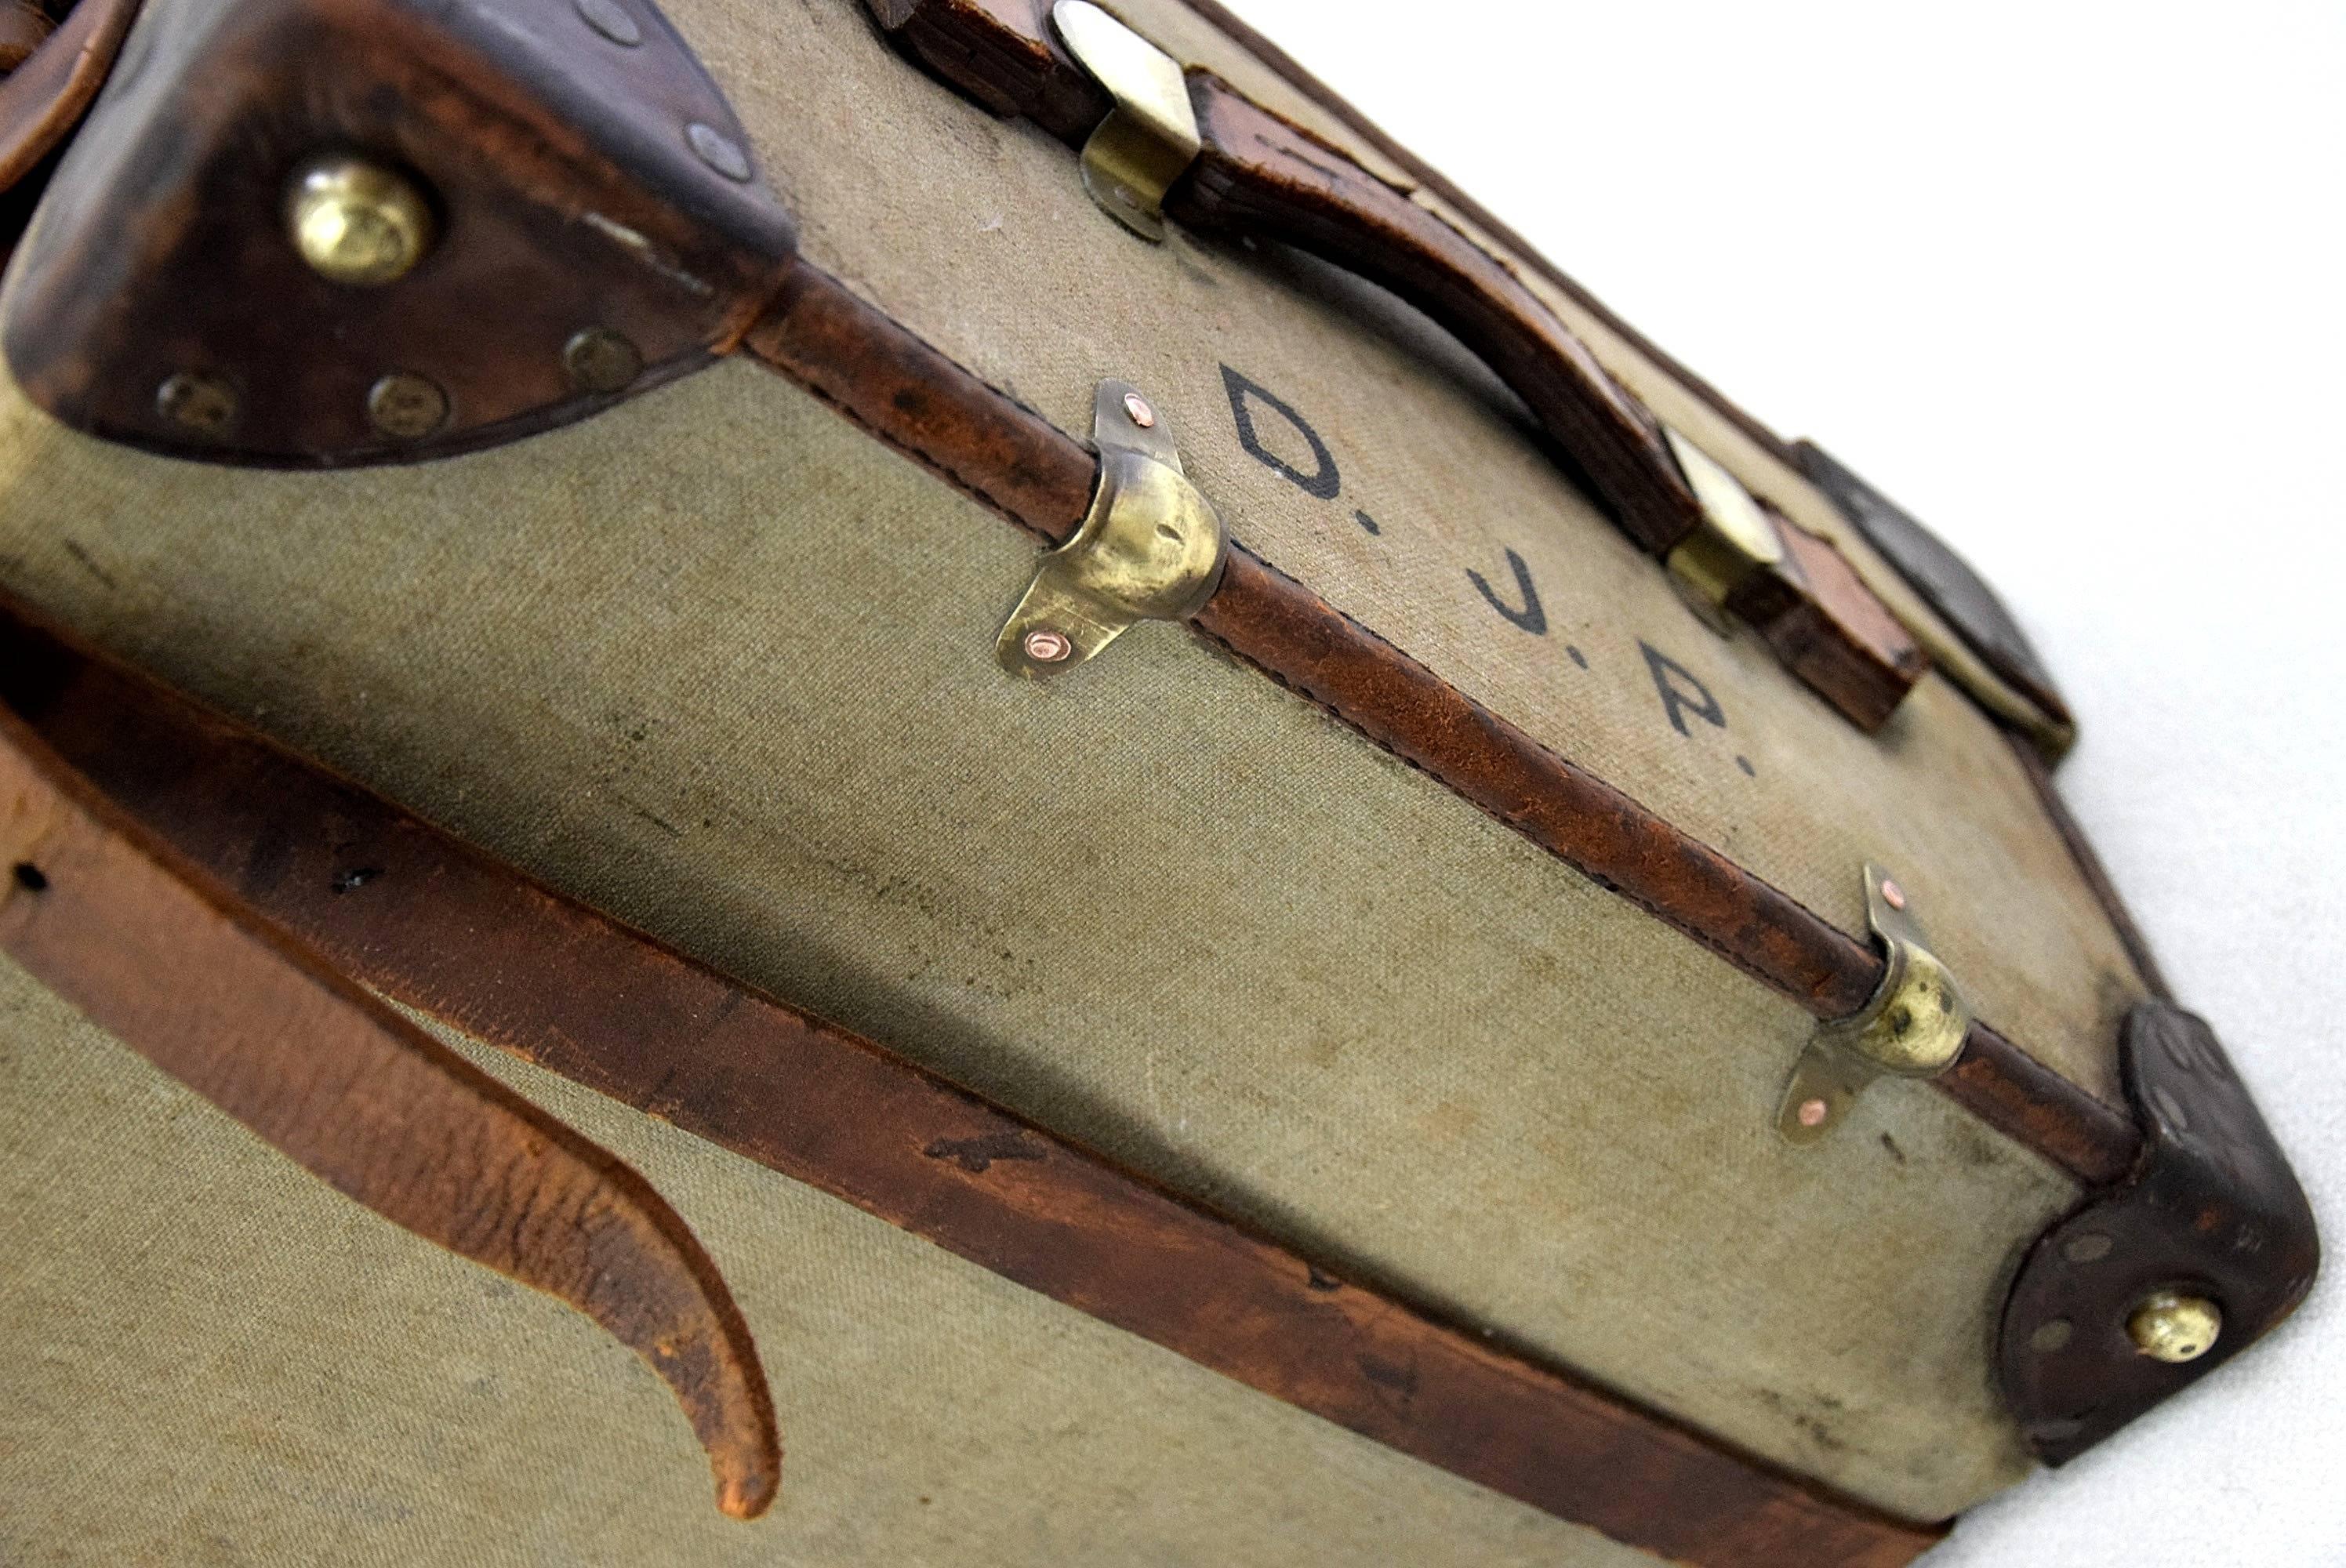 A beautiful hand made suitcase that has seen the world. Hand made by the renown suitcase makers from Edinburgh, Scotland.
 
Beautiful brass & copper details, the use of the thickest and strongest leather available and all created with passion by